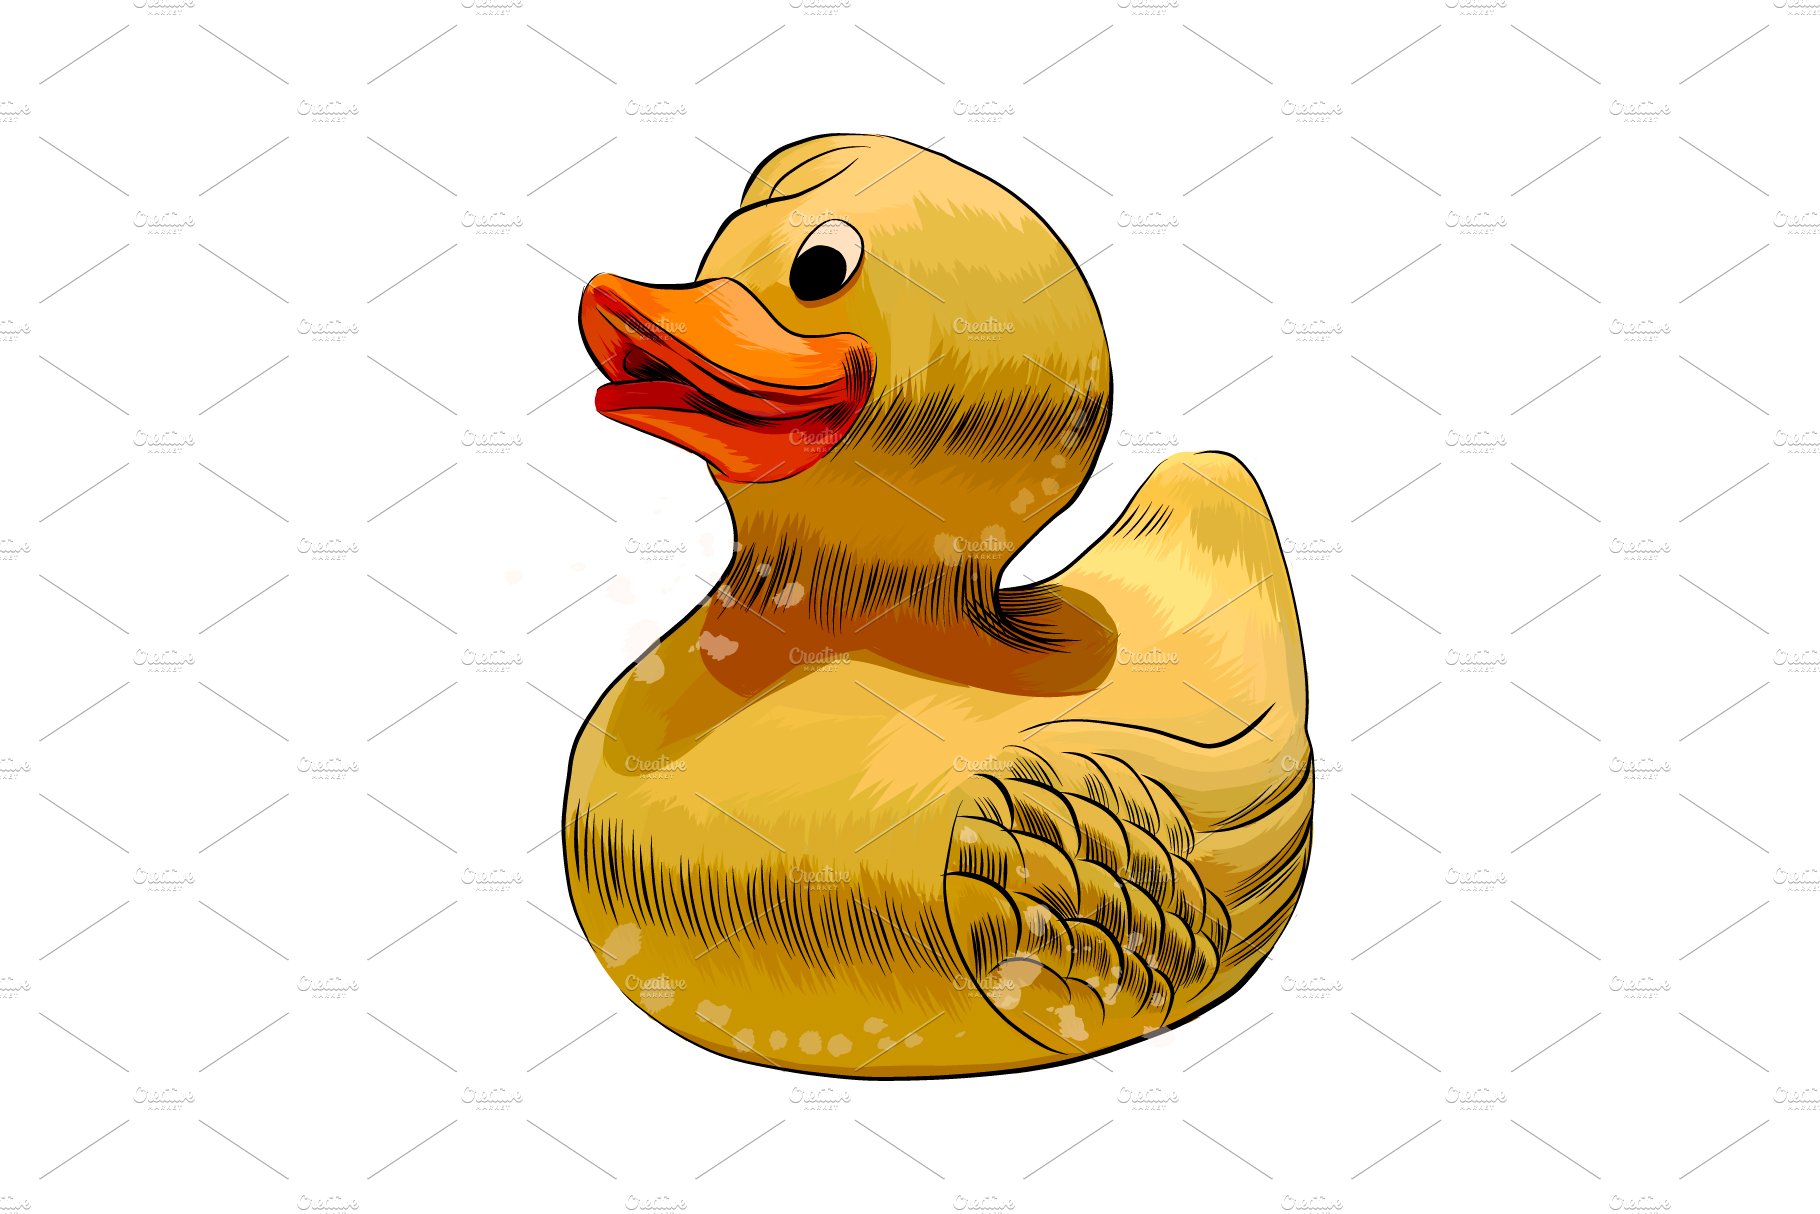 Duck toy. Inflatable rubber duck cover image.